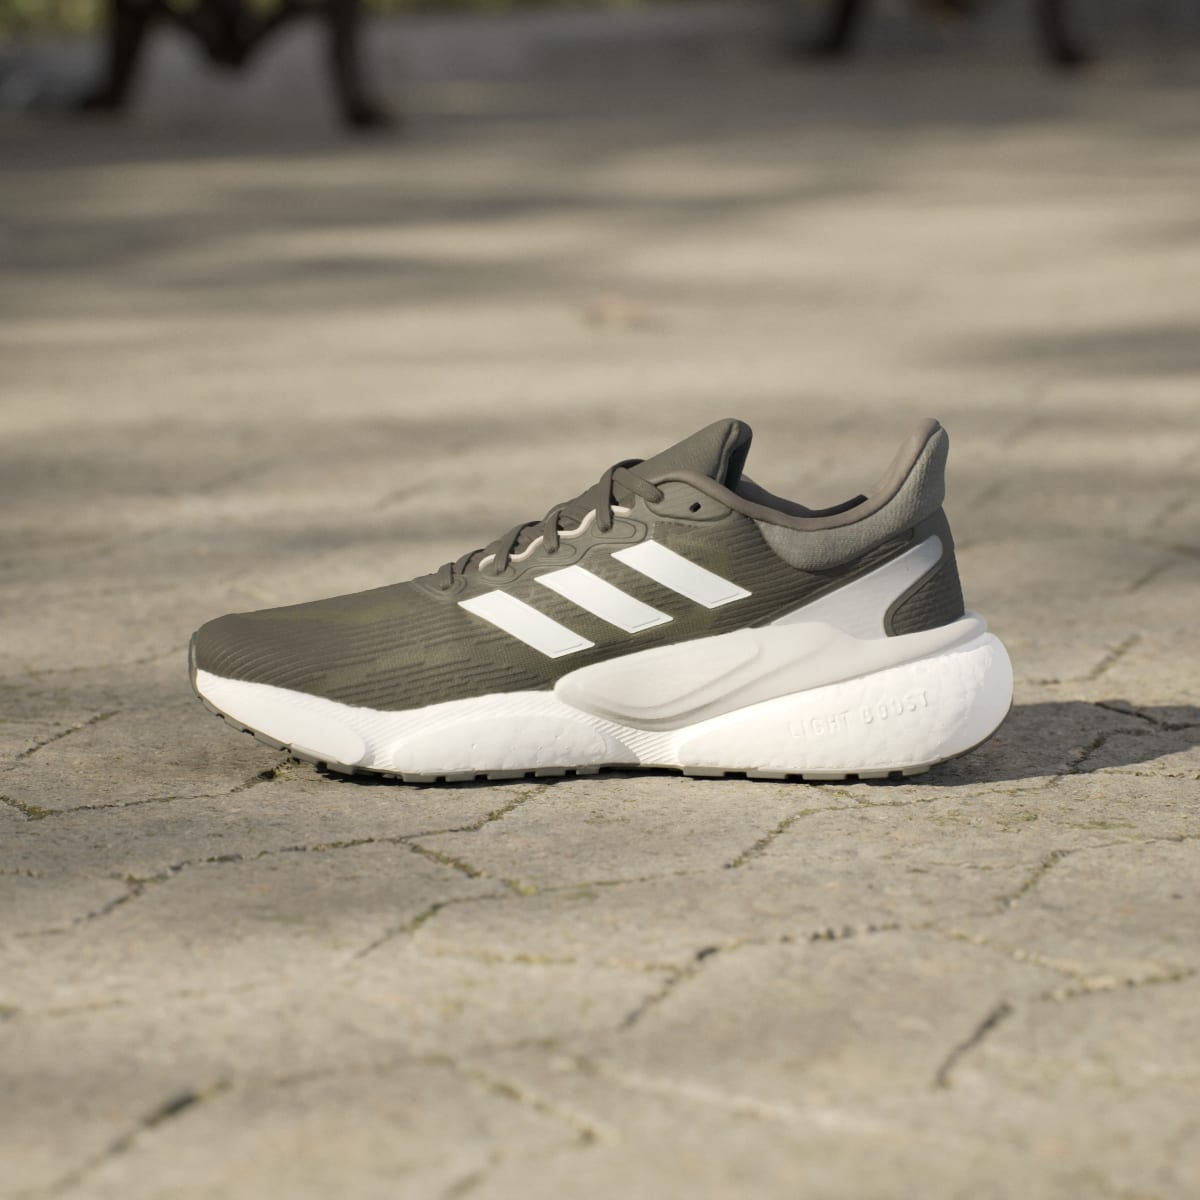 Adidas Solarboost 5 Shoes. 6